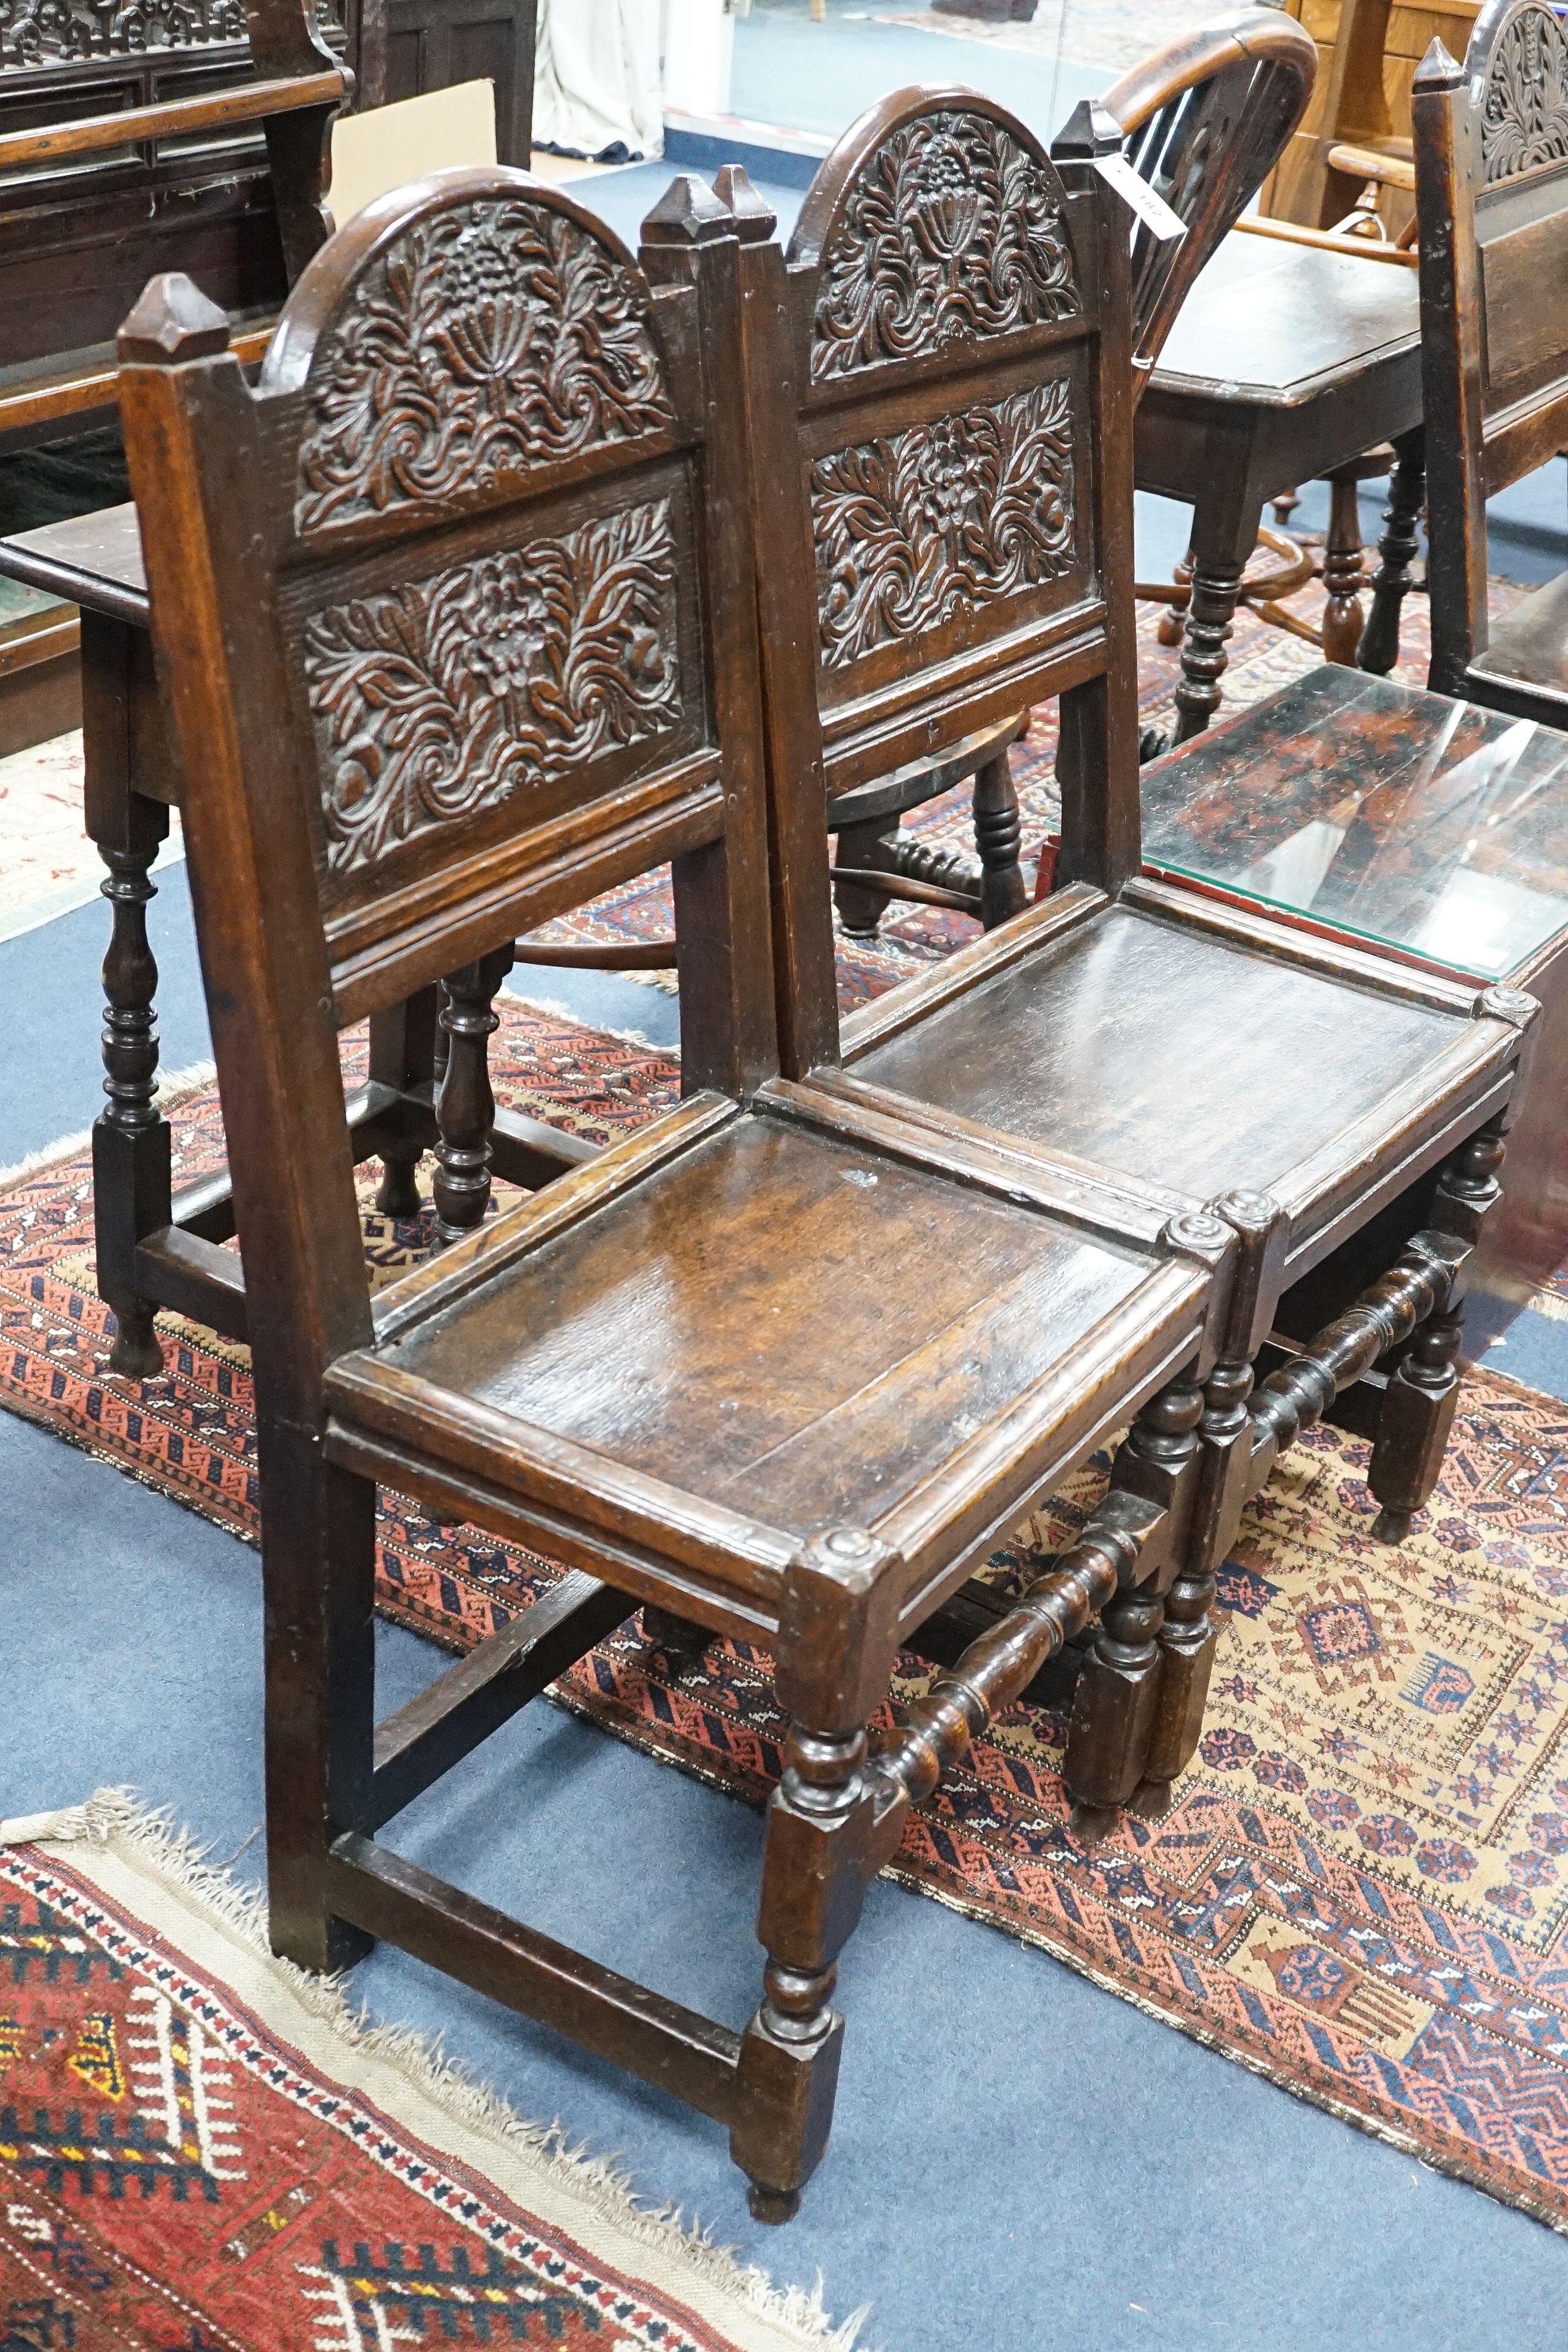 A pair of 17th century Lancashire carved oak side chairs, width 45cm, depth 39cm, height 101cm